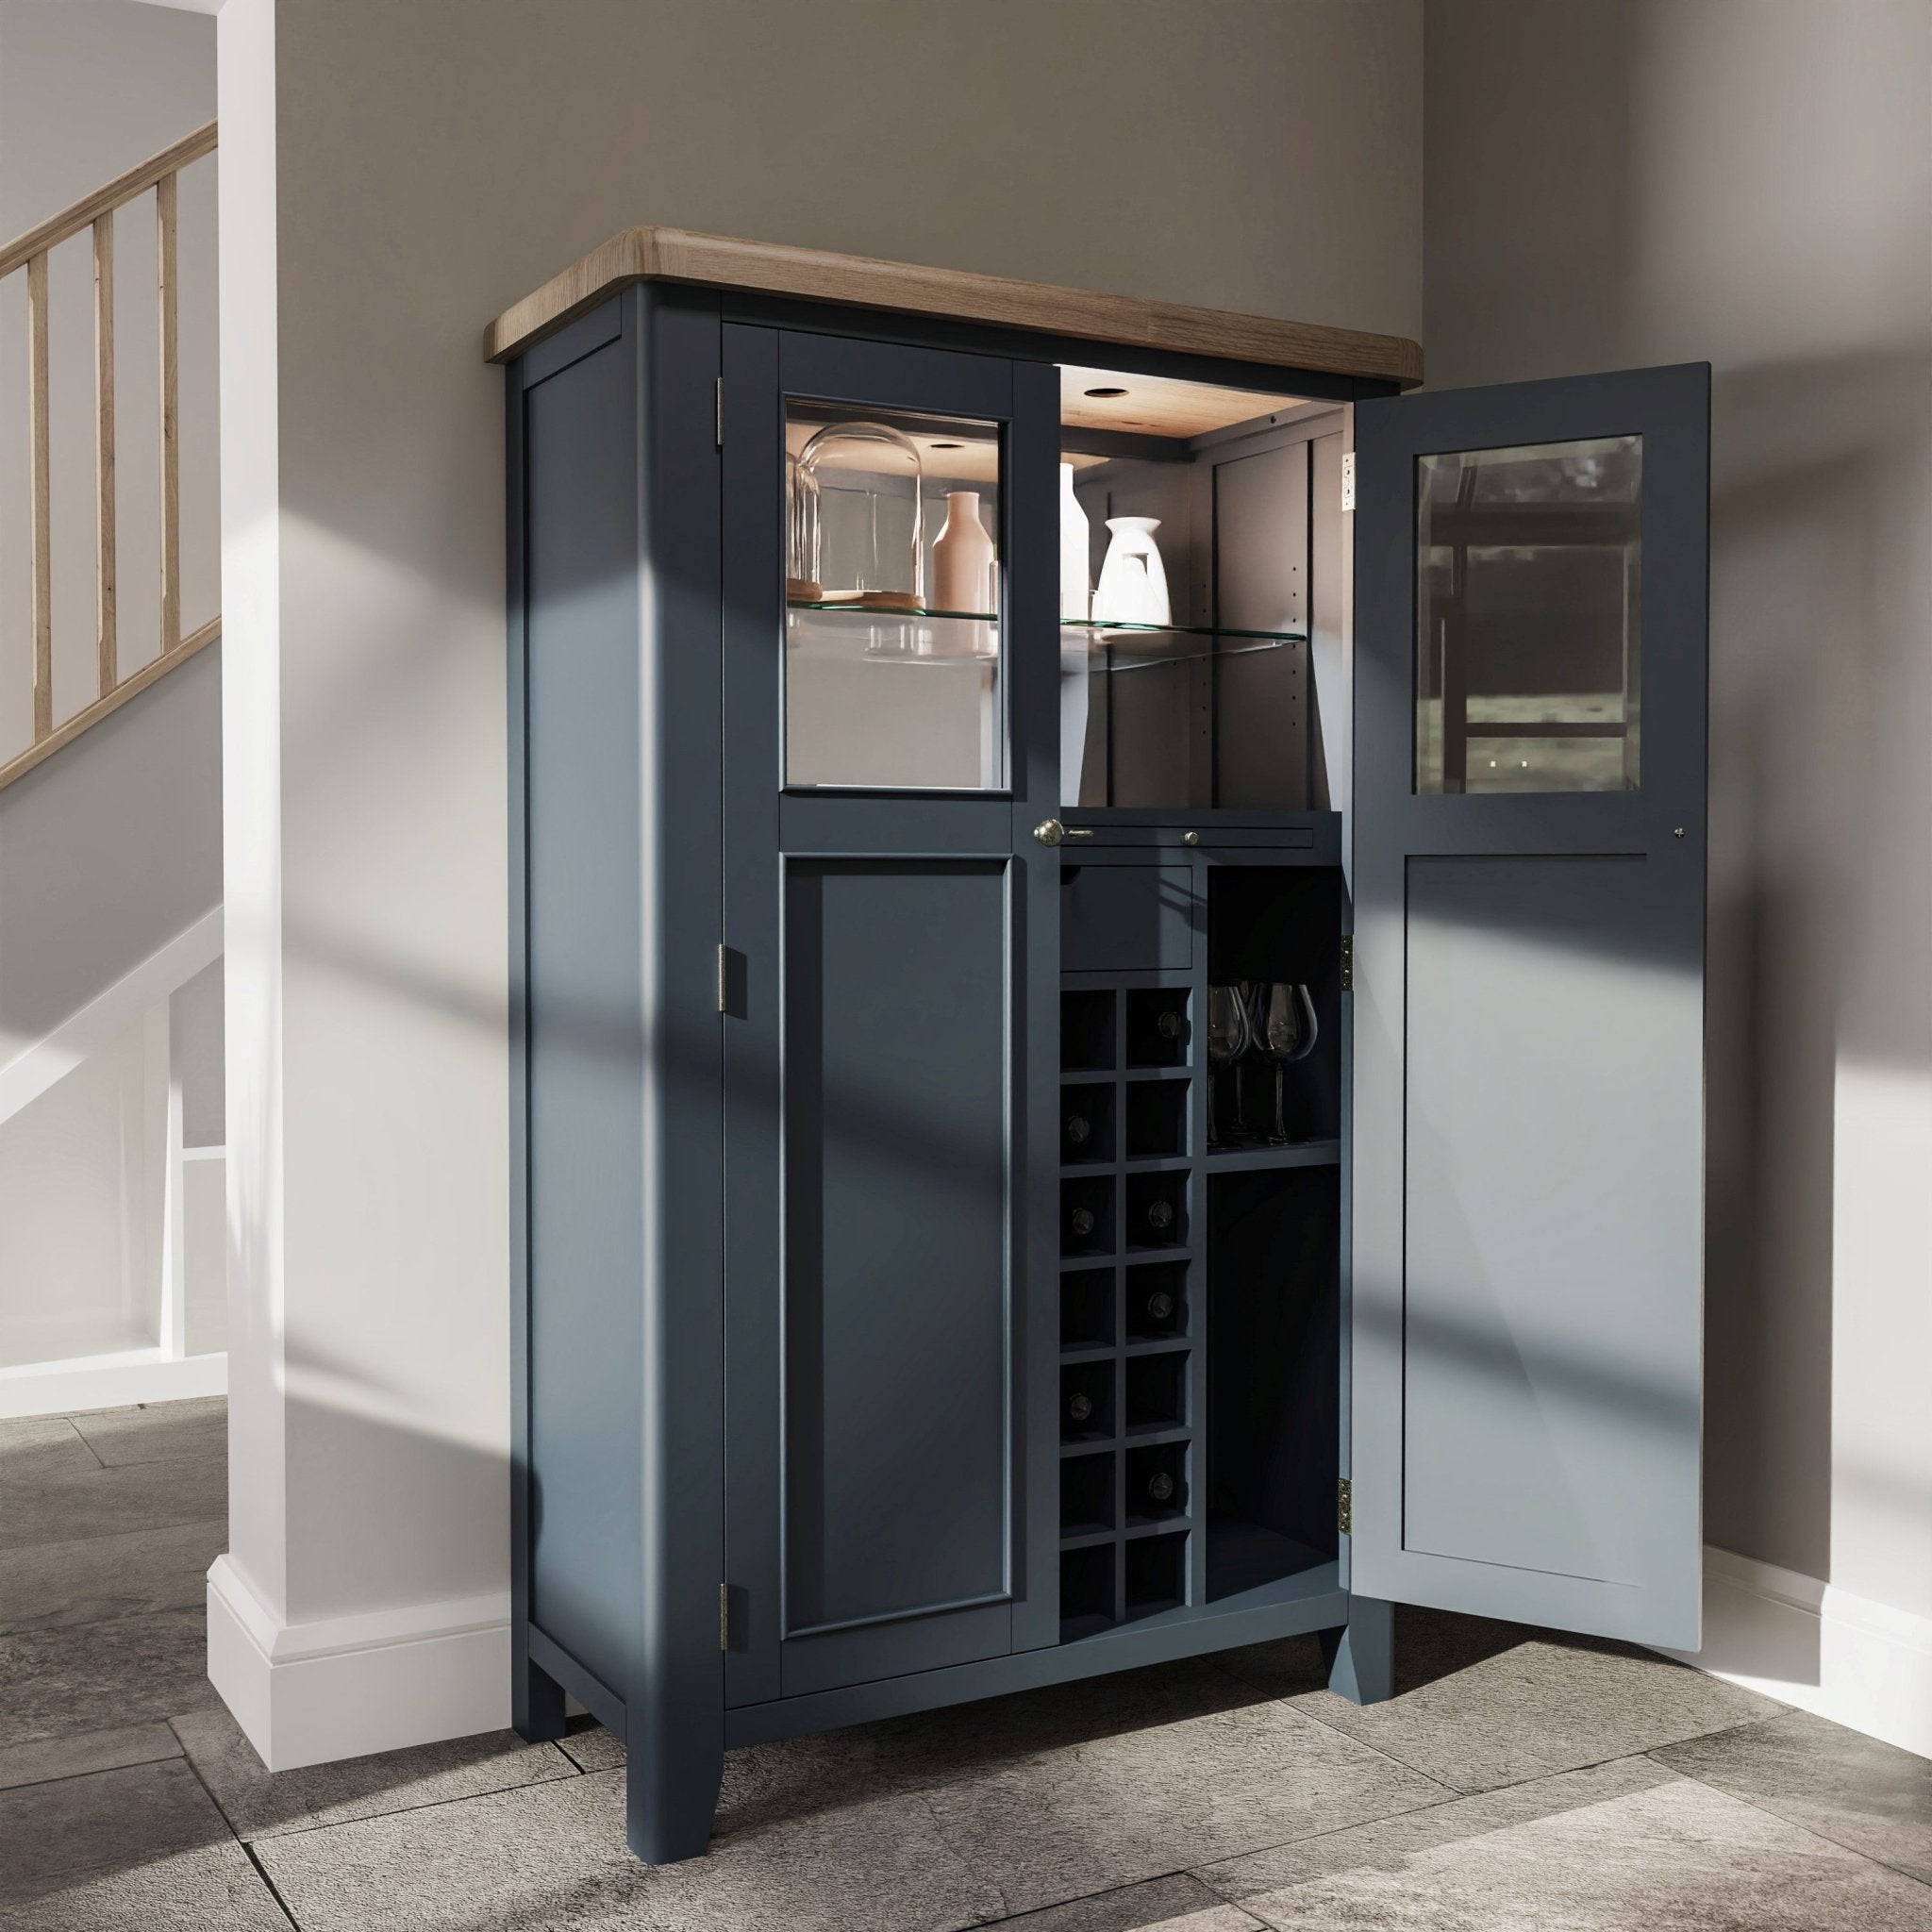 Rogate Blue Painted Drinks Cabinet Cupboard - Duck Barn Interiors